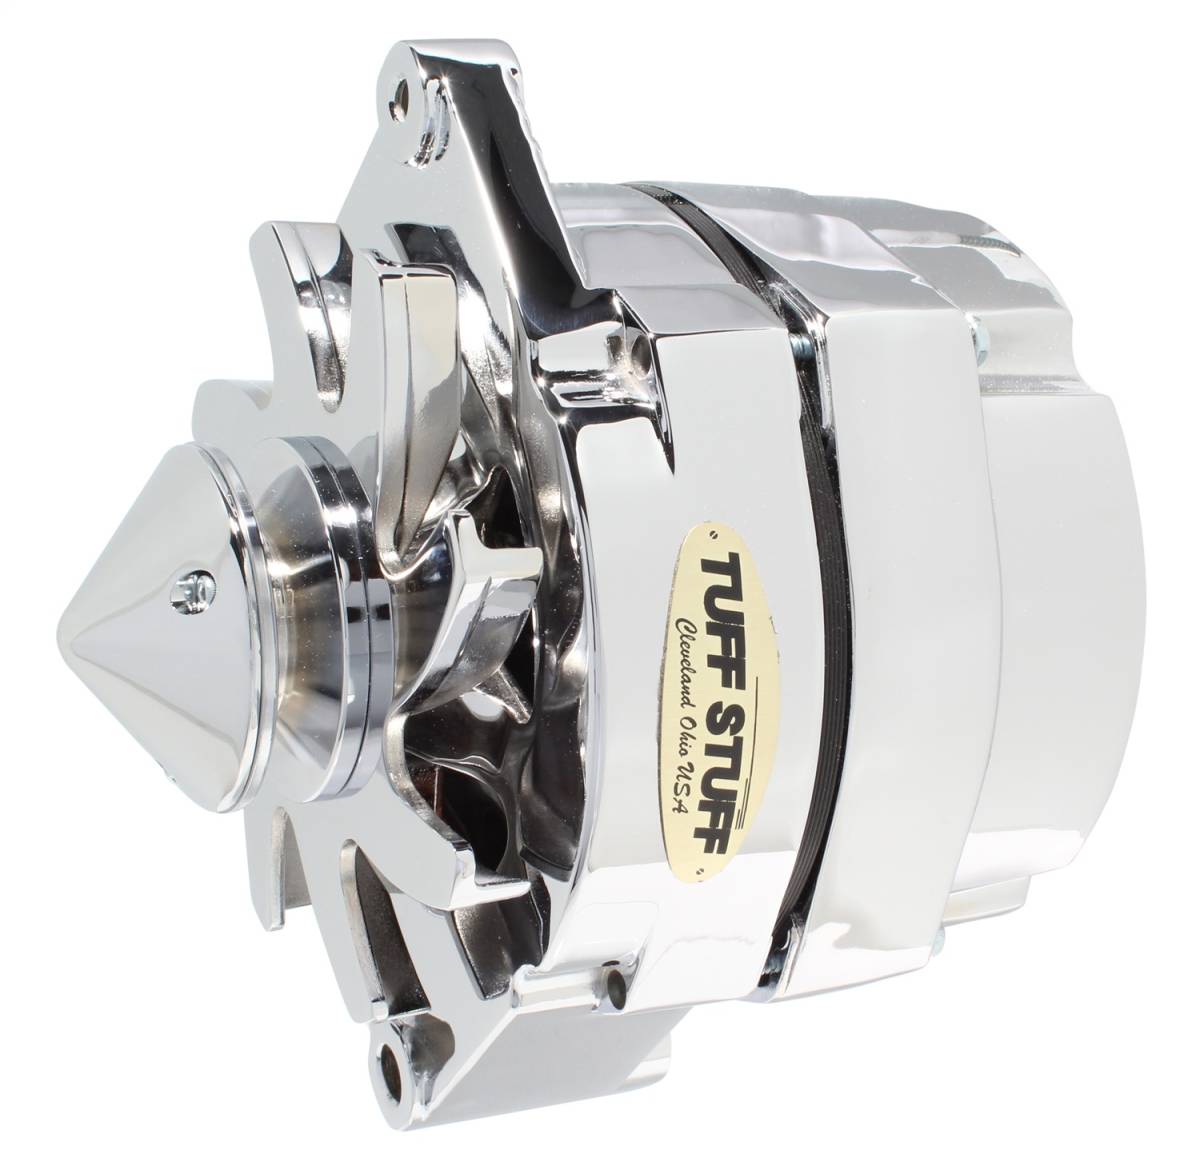 Tuff Stuff Performance - Silver Bullet Alternator 140 AMP OEM Or 1 Wire V Groove Bullet Pulley 4.85 in. Case Depth Lower Mount Boss 2 in. Long Polished 12 Clocking 7140BBULL12